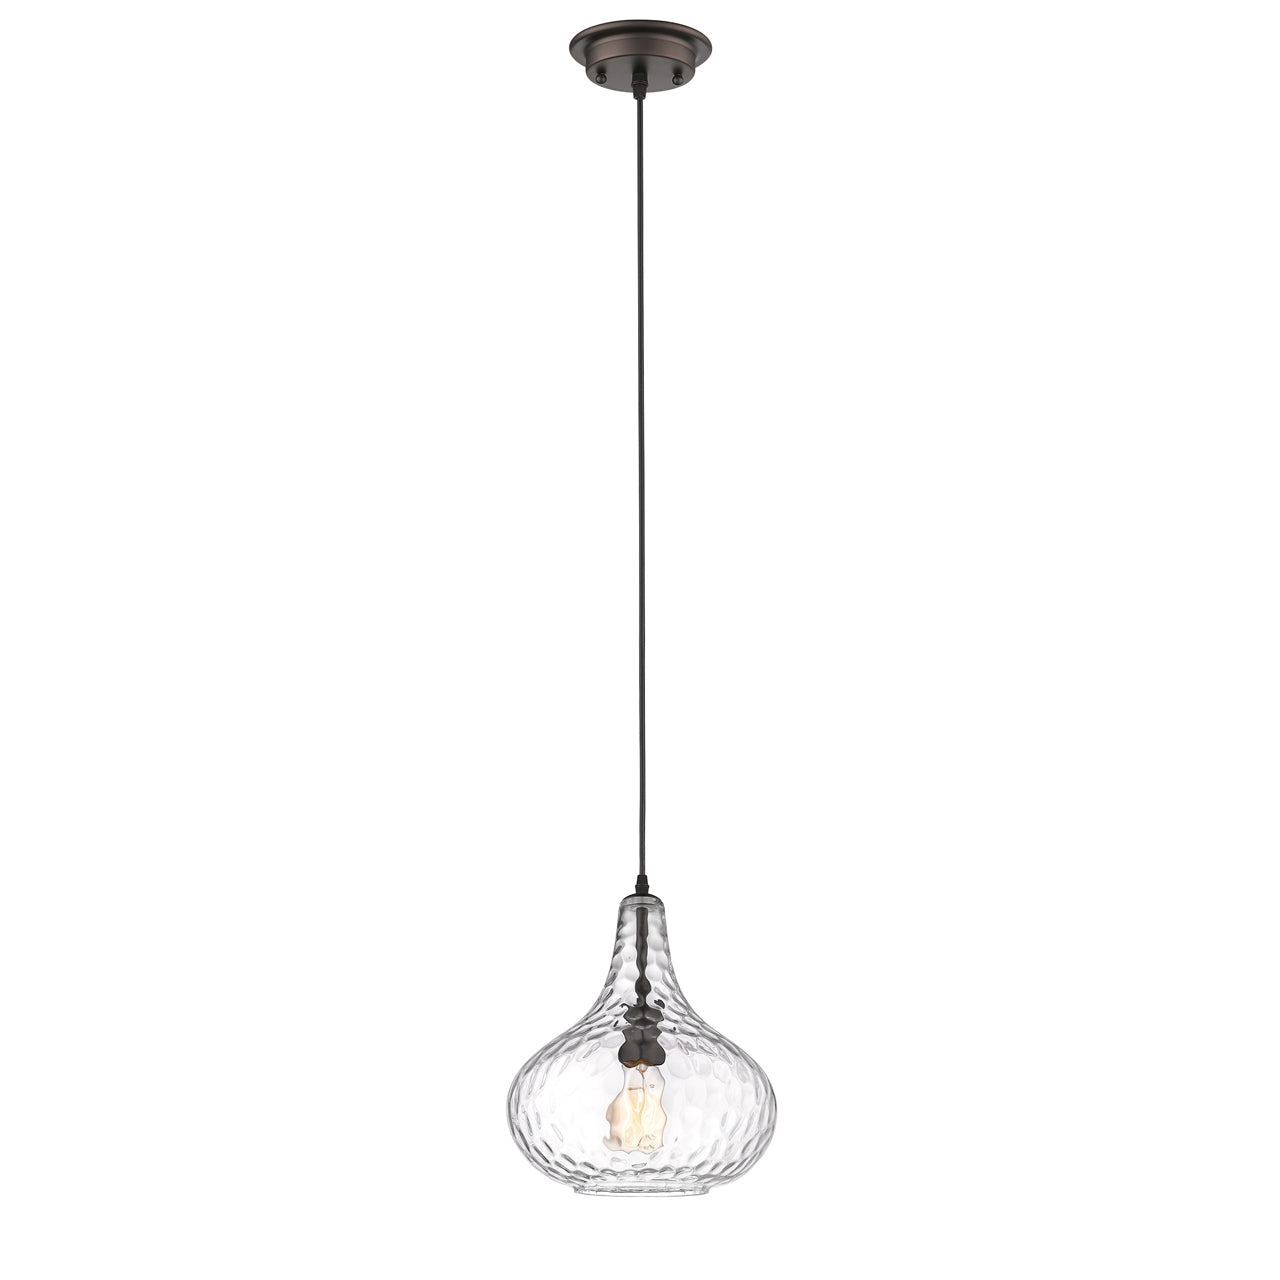 HAILEY Transitional 1 Light Rubbed Bronze Ceiling Mini Pendant 11" Wide